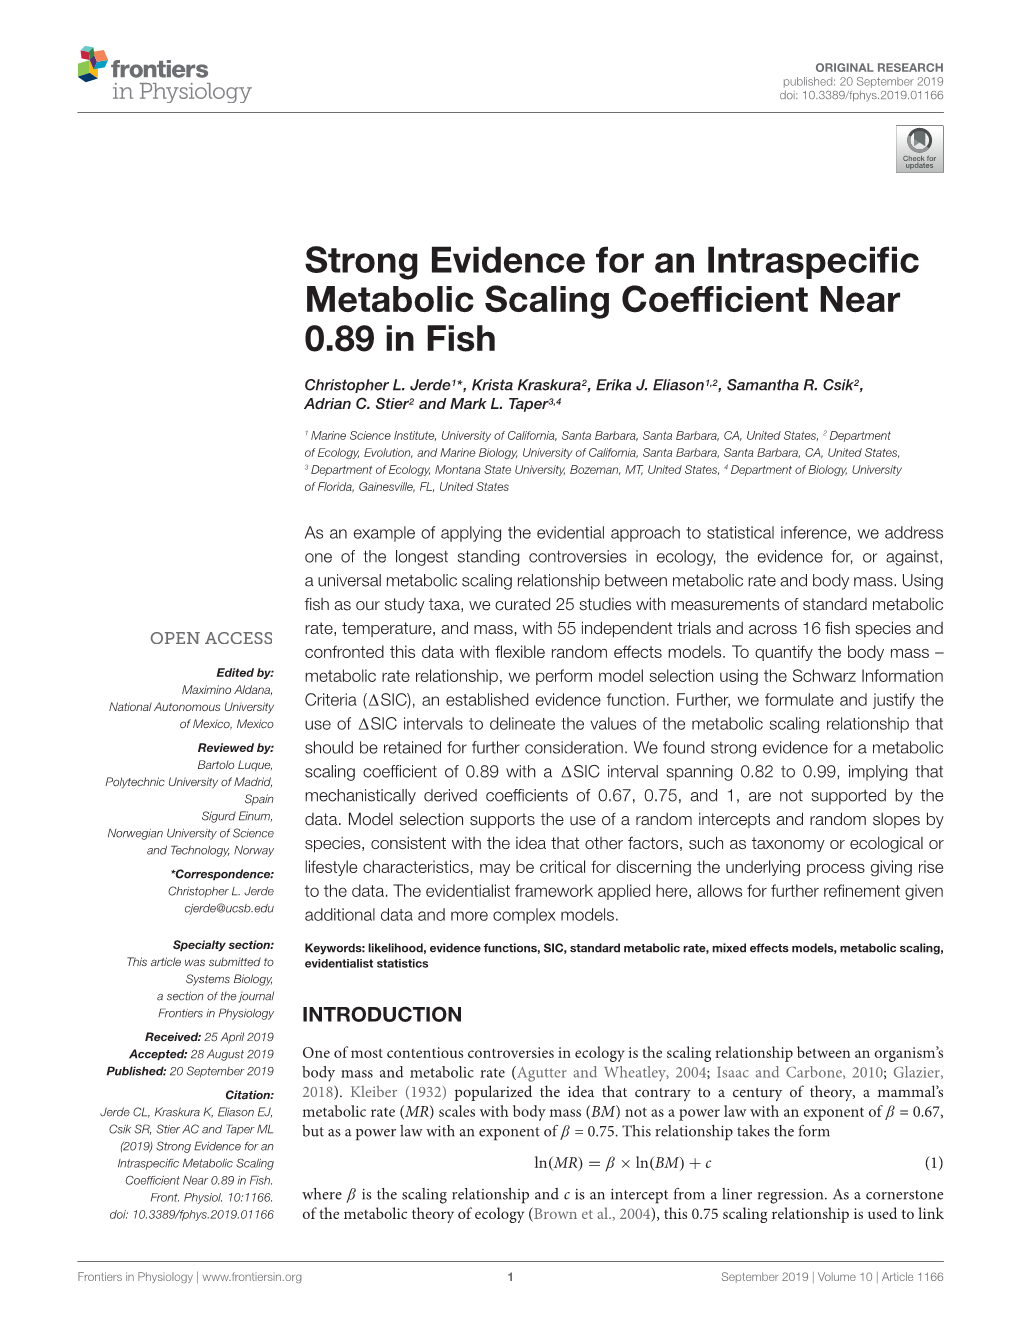 Strong Evidence for an Intraspecific Metabolic Scaling Coefficient Near